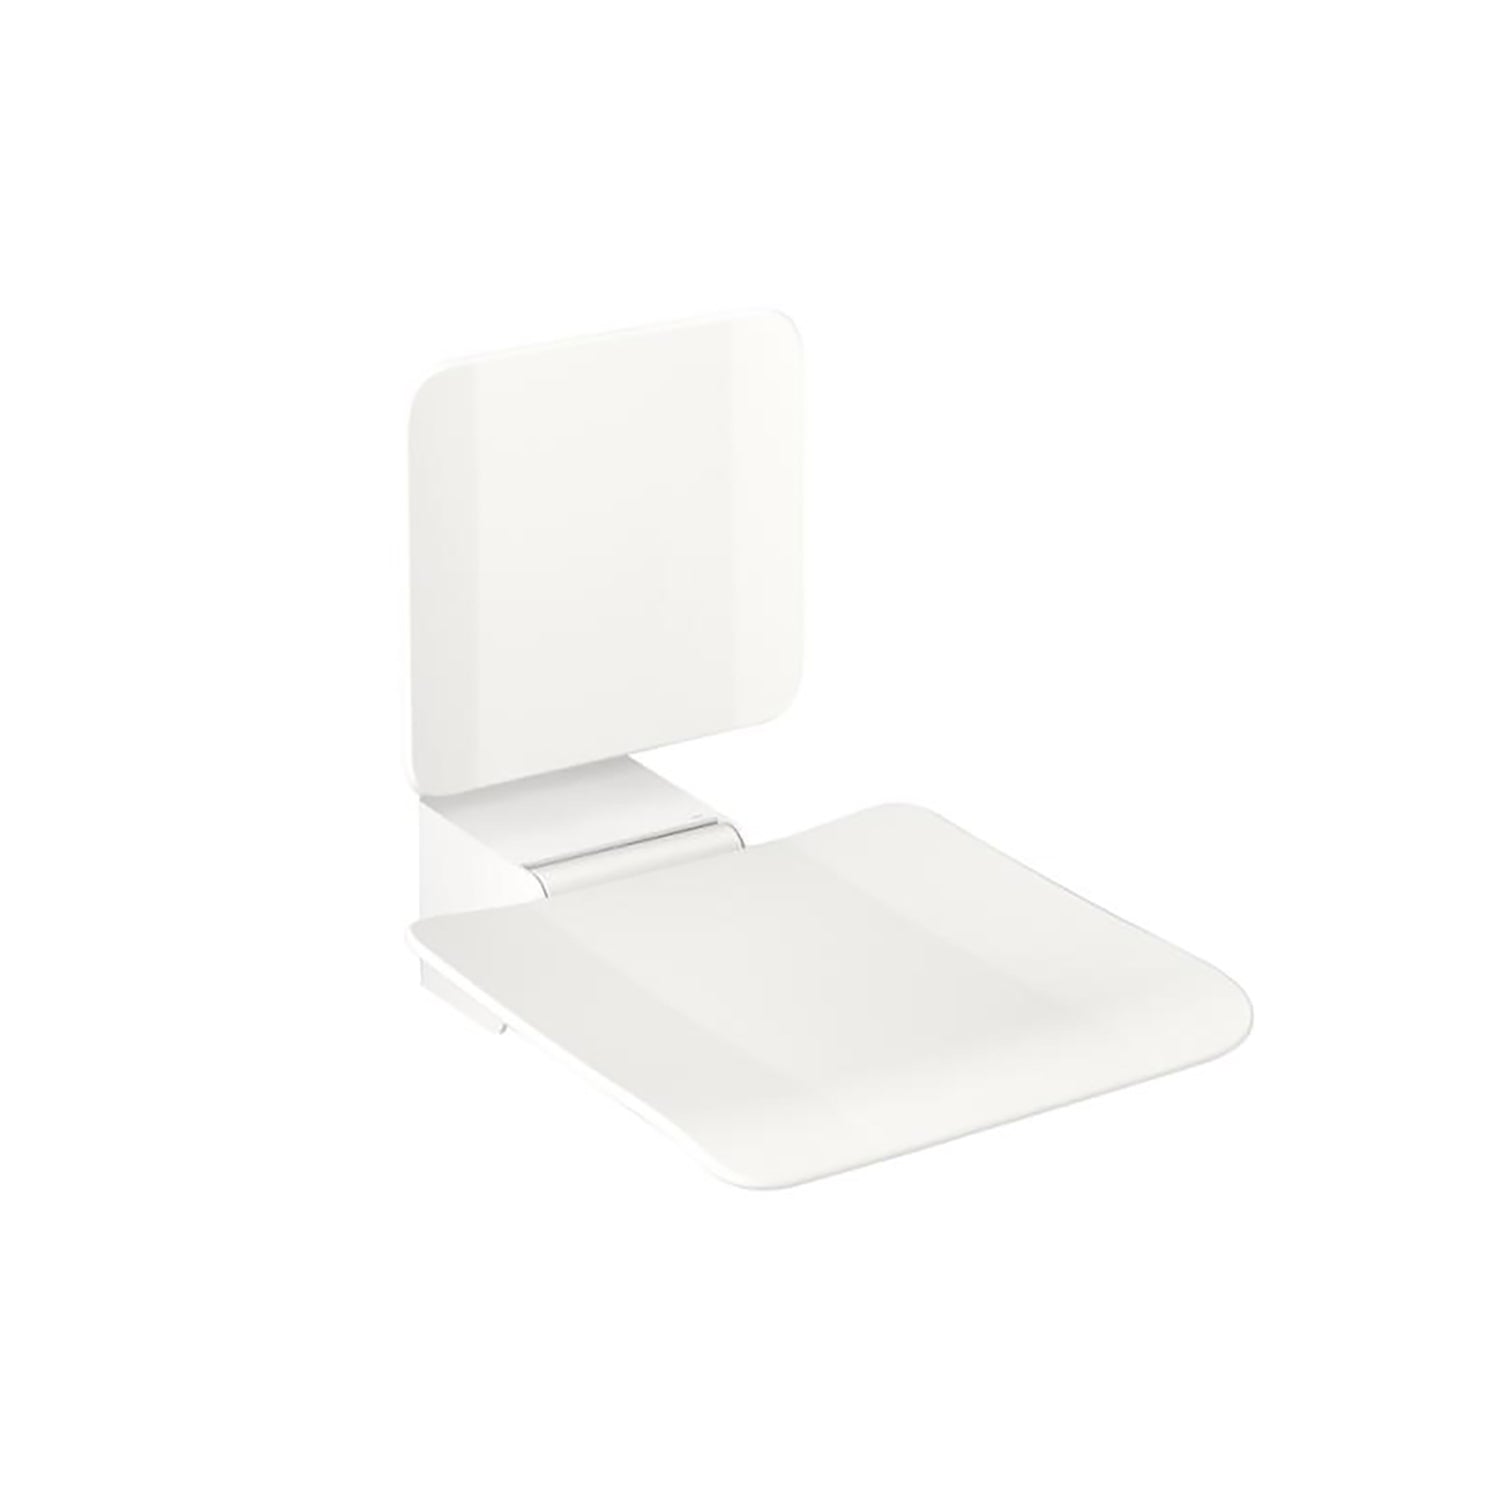 Freestyle Fixed Shower Seat with a Backrest in an white seat and white finish bracket on a white background